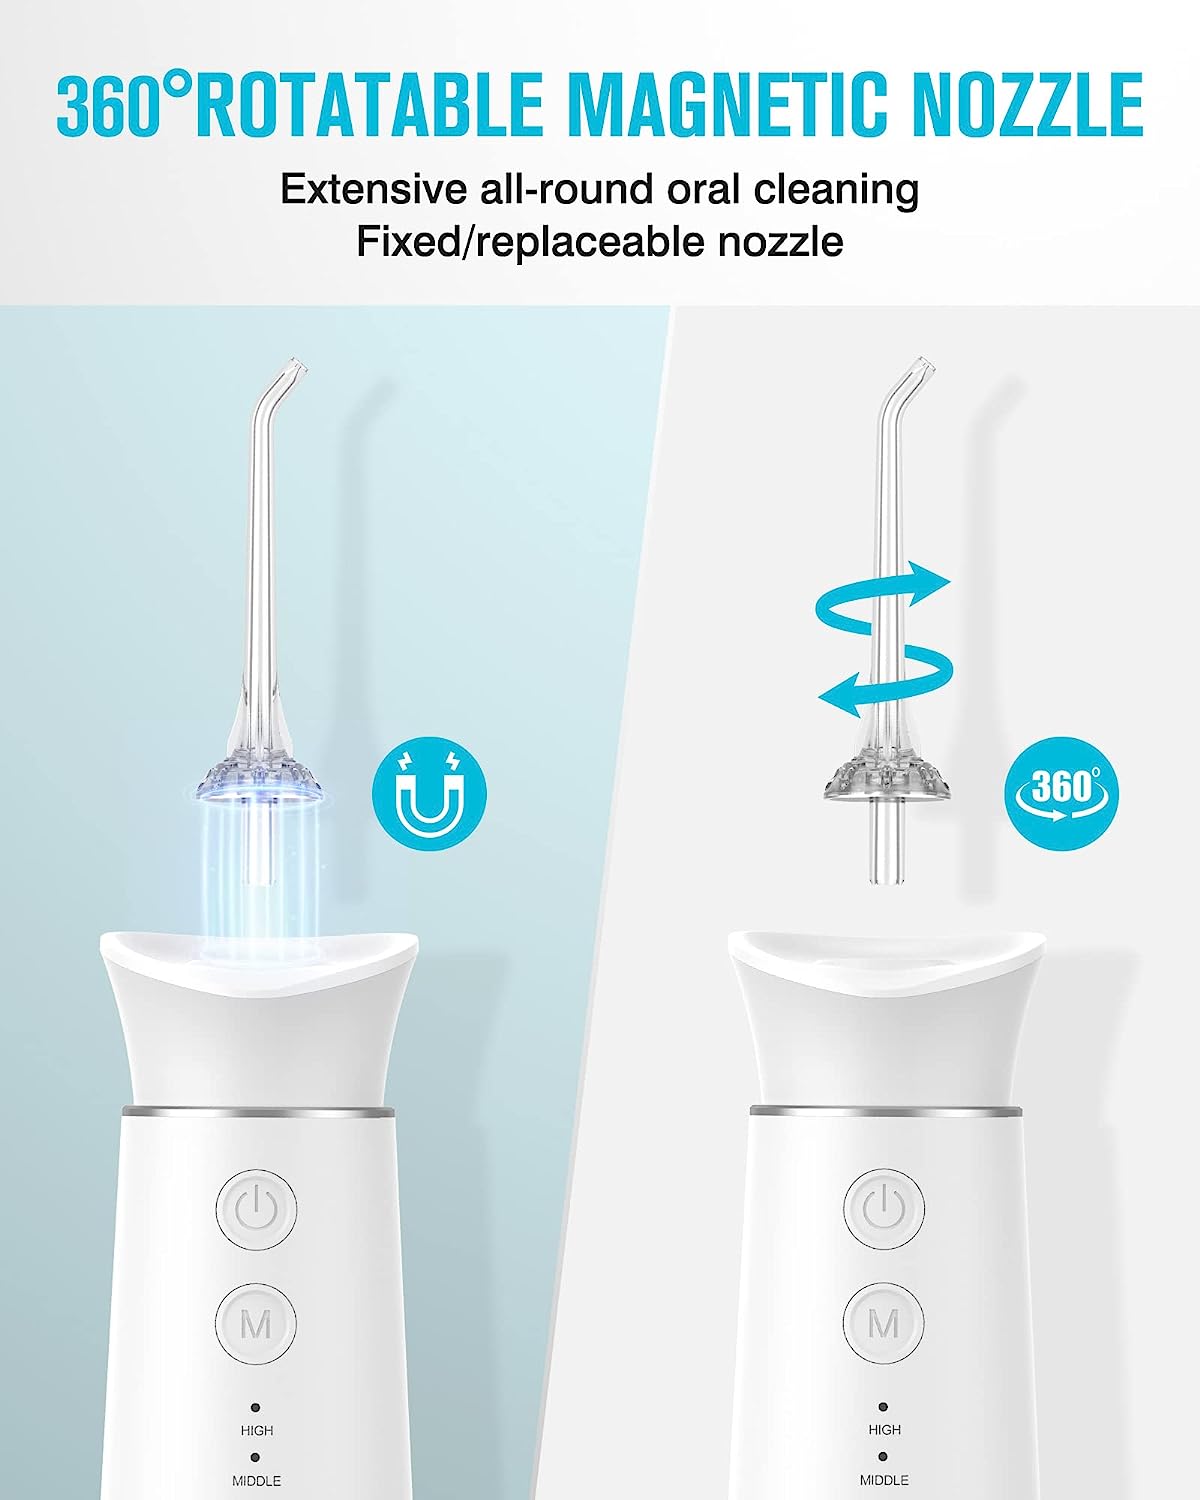 Water Dental Flosser Cordless with Magnetic Charging for Teeth Cleaning, Nursal 7 Clean Settings Portable Rechargeable Oral Irrigator, IPX8 Waterproof Water Dental Picks for Home Travel, DC5121 White,